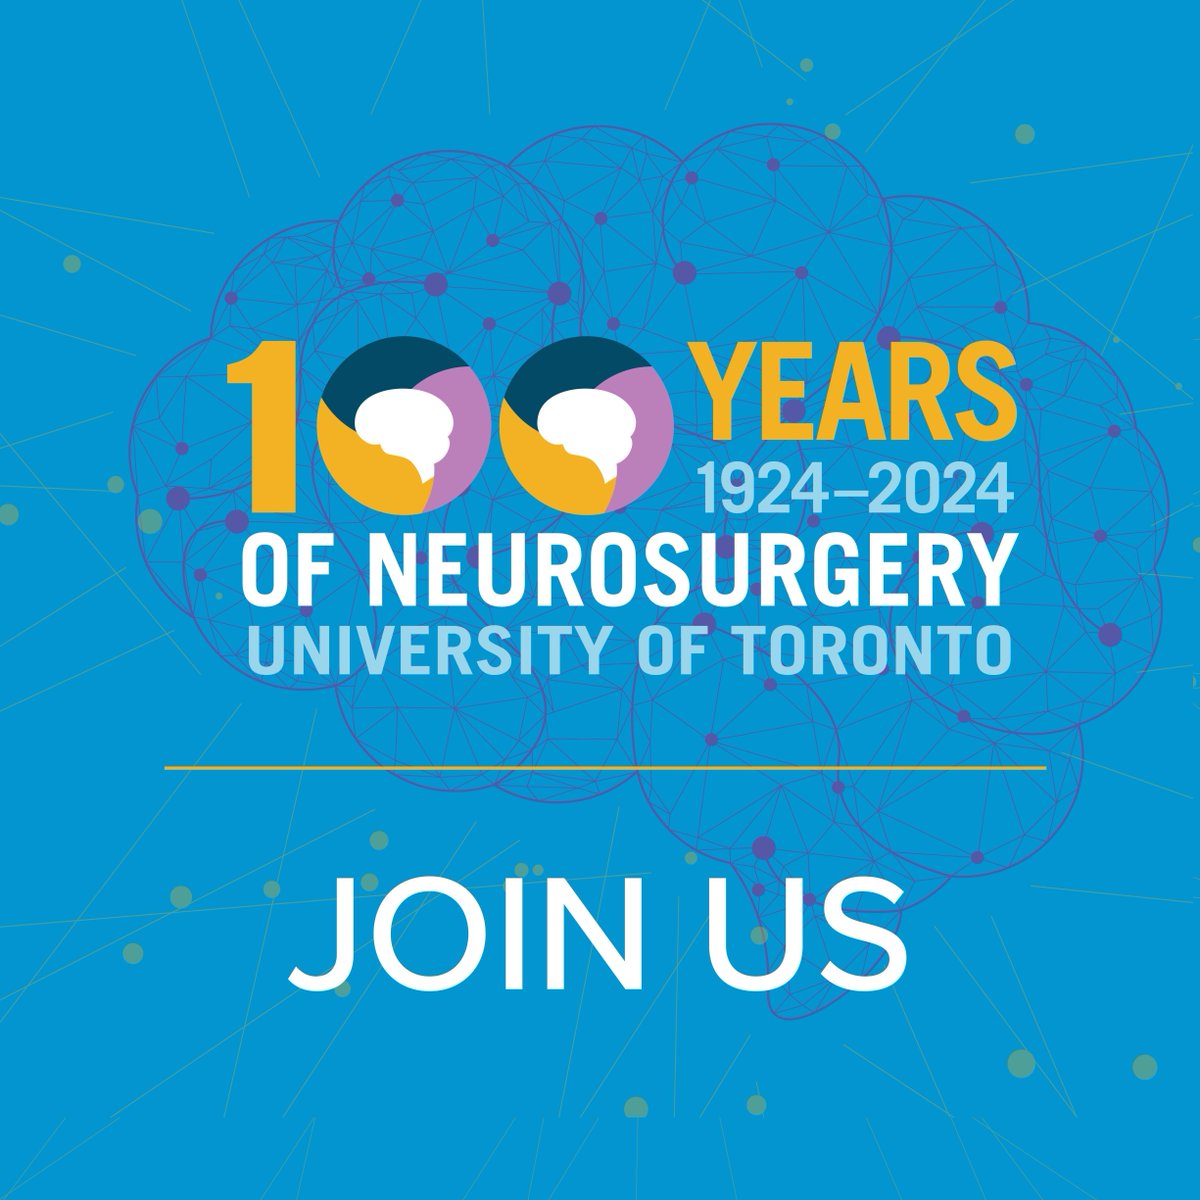 We are ONE MONTH away from our #UofT #Neurosurgery 100 year celebrations! Join us for an amazing lineup of #conferences, #courses, and #celebrations in Toronto - there is still time to register! bit.ly/3PihHdP @gelarehzadeh @FarshadNassiri @UofTSurgery